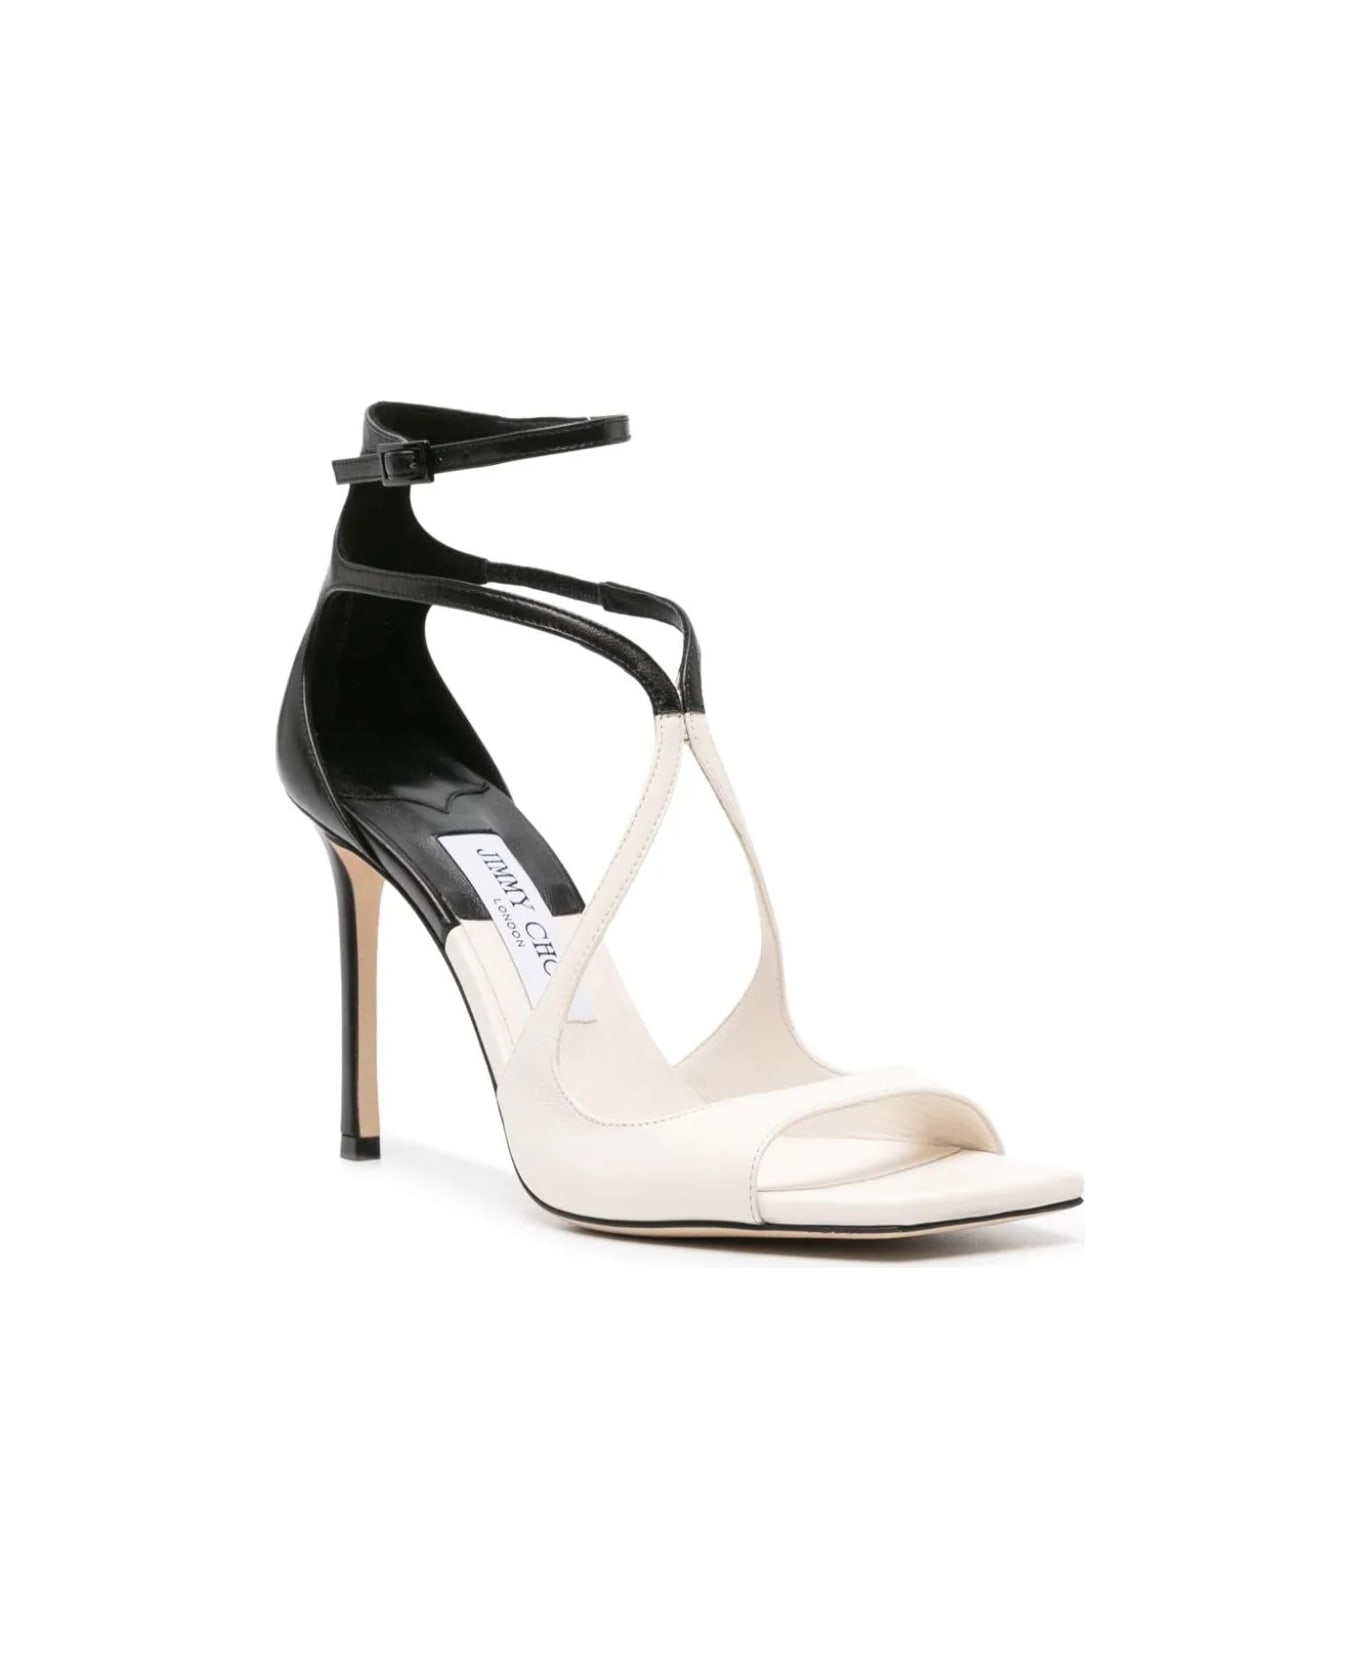 Jimmy Choo Azia Sandals In Black And White Milk Patchwork Nappa Leather - Multicolour